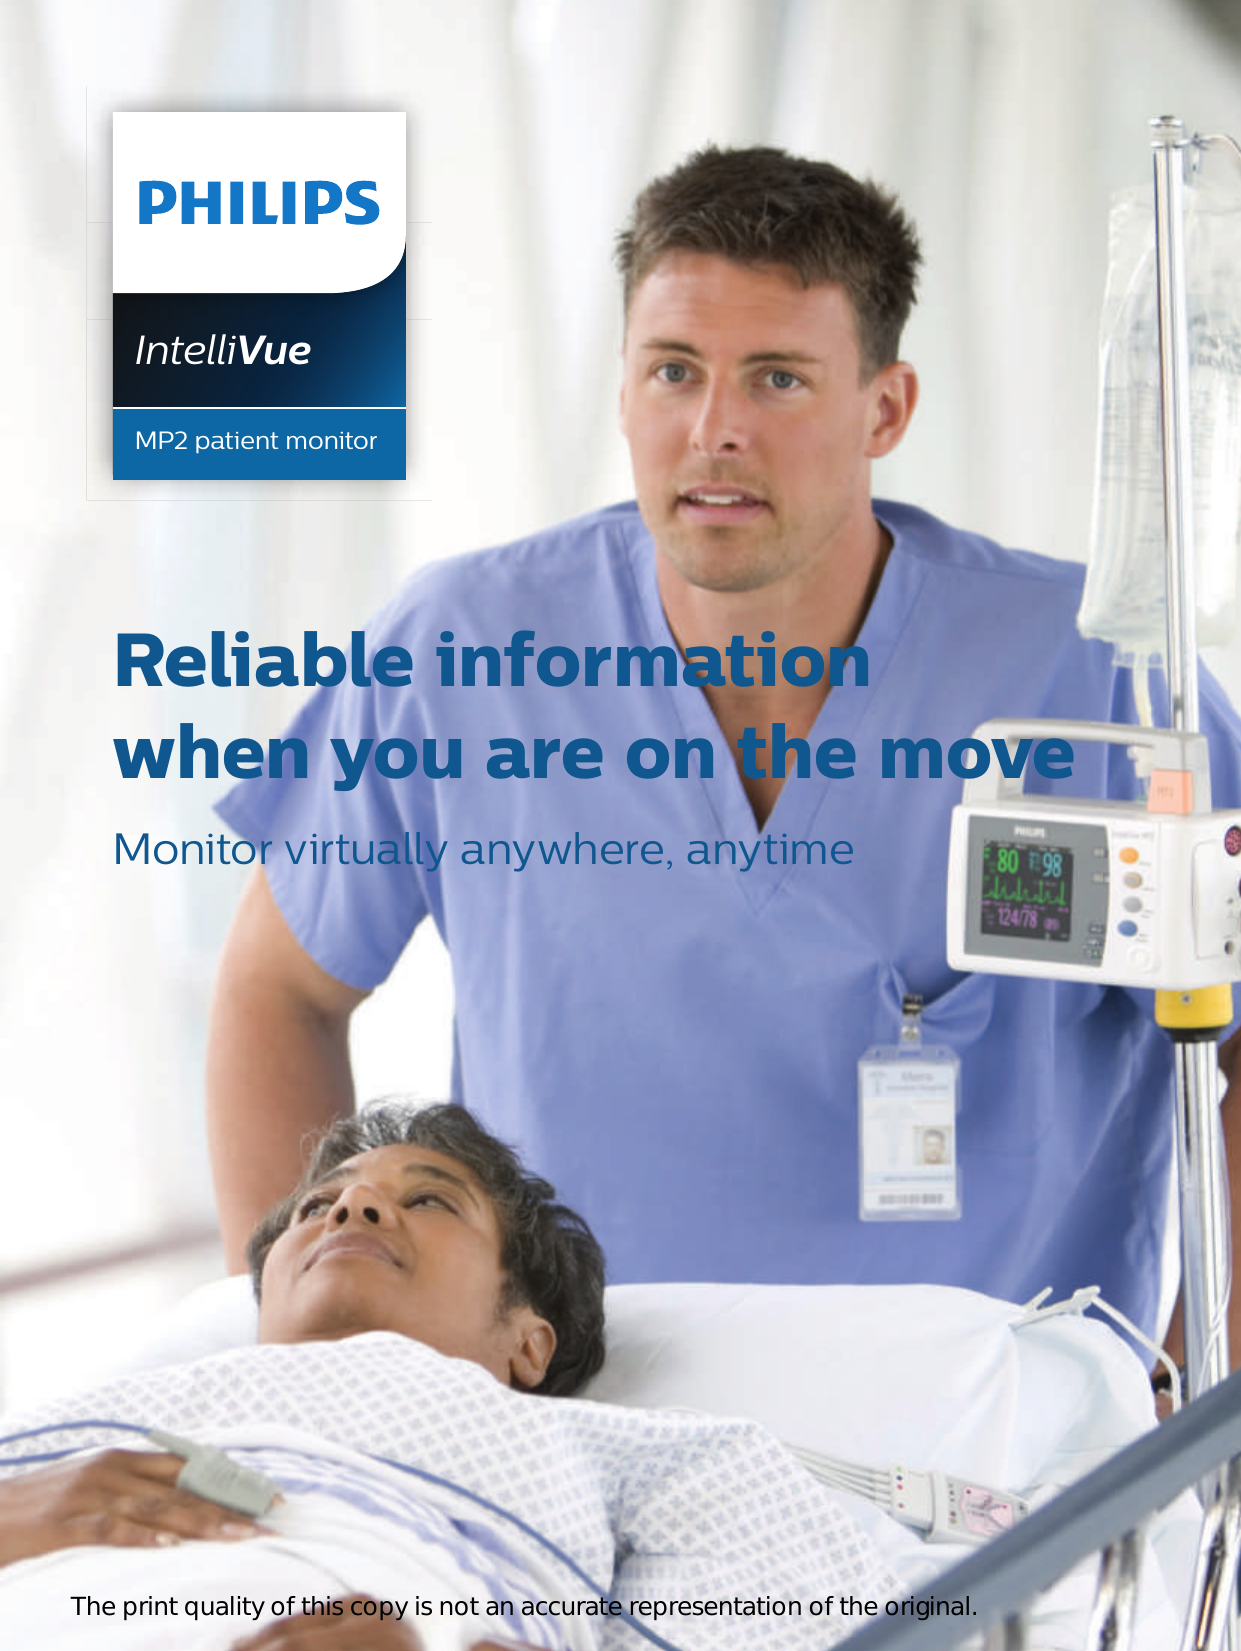 Page 1 of 6 - Philips 865040 452299109441 User Manual Product Brochure Intelli Vue Portable Patient Monitor MP2 Ffd03f79deaf4e43a5d8a77c014f1d93